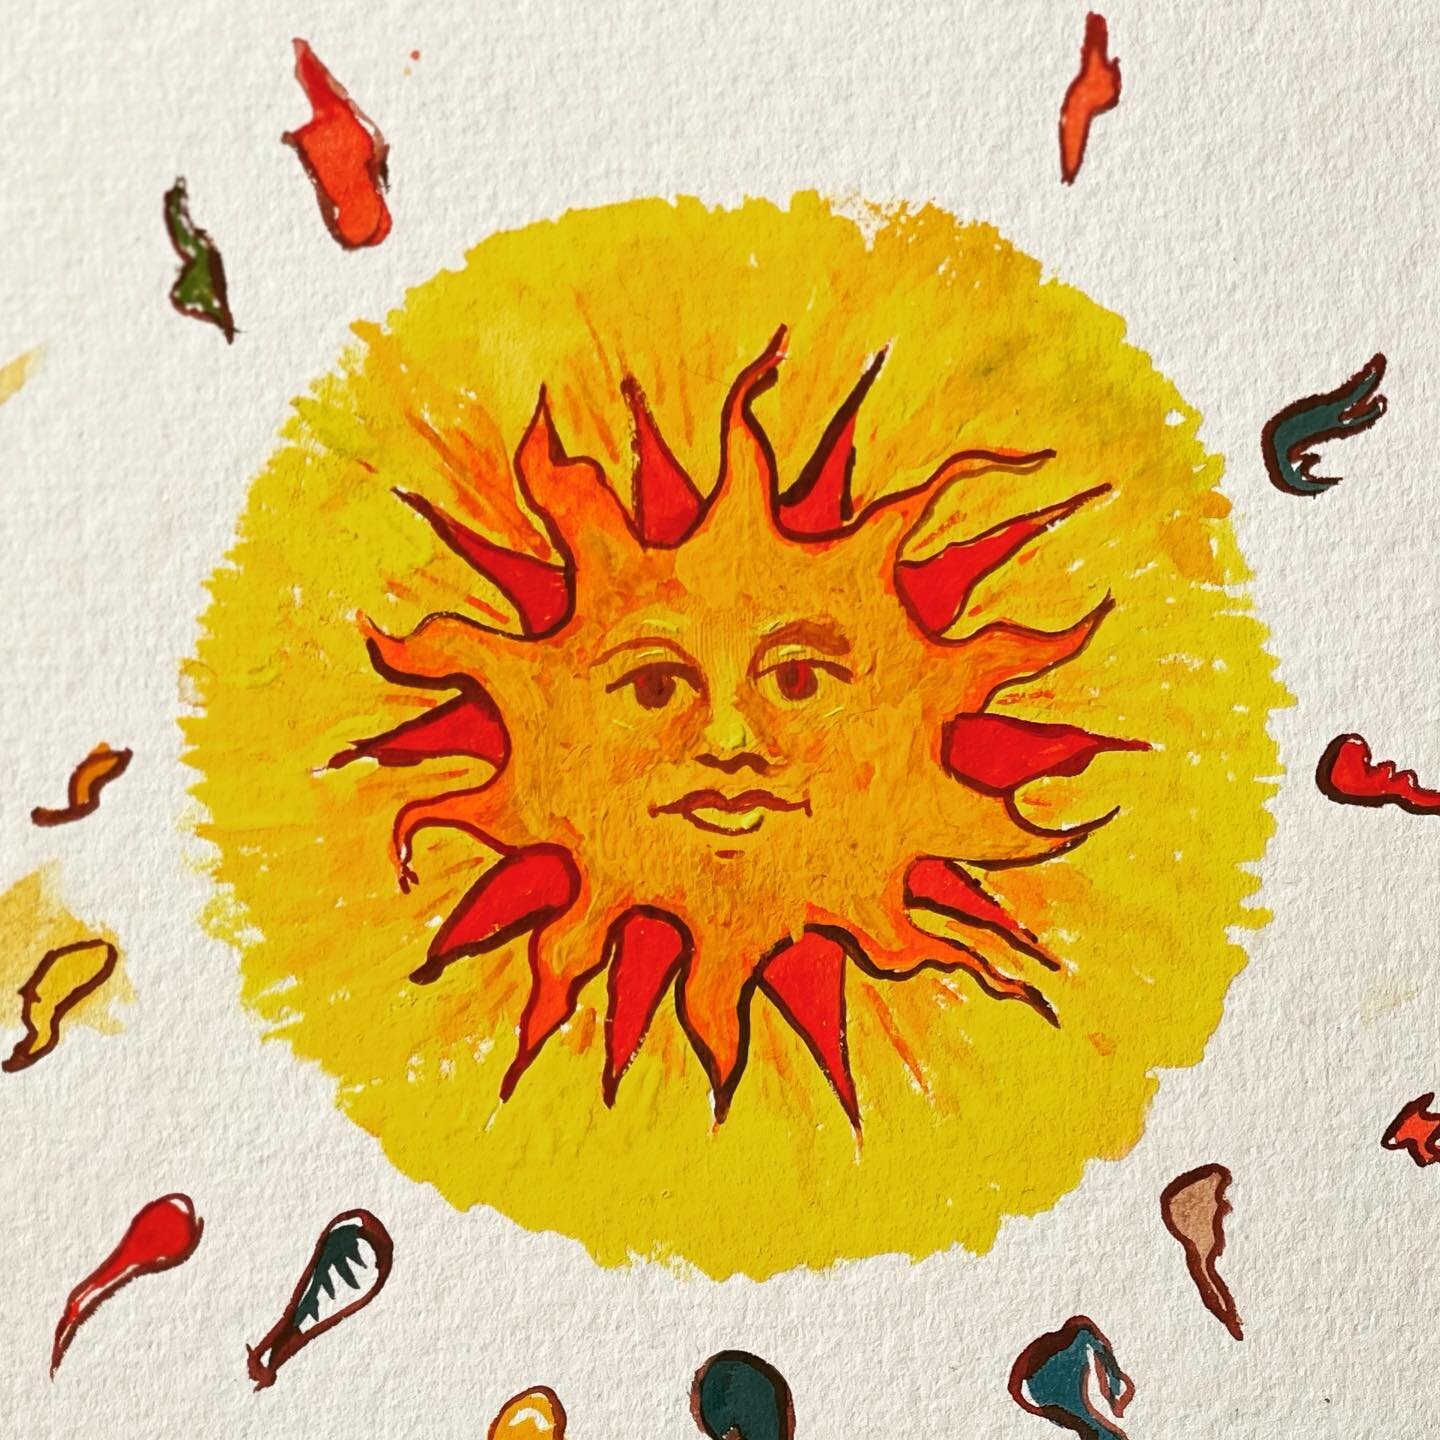 I like to celebrate celestial cycles. They feel natural, internal, timeless.🌻Happy Solstice from this Sunny fellow that I created as one of the friendly esoteric images in the @_taroaro app. It is reminder that the light is always on🌞

@_taroaro is